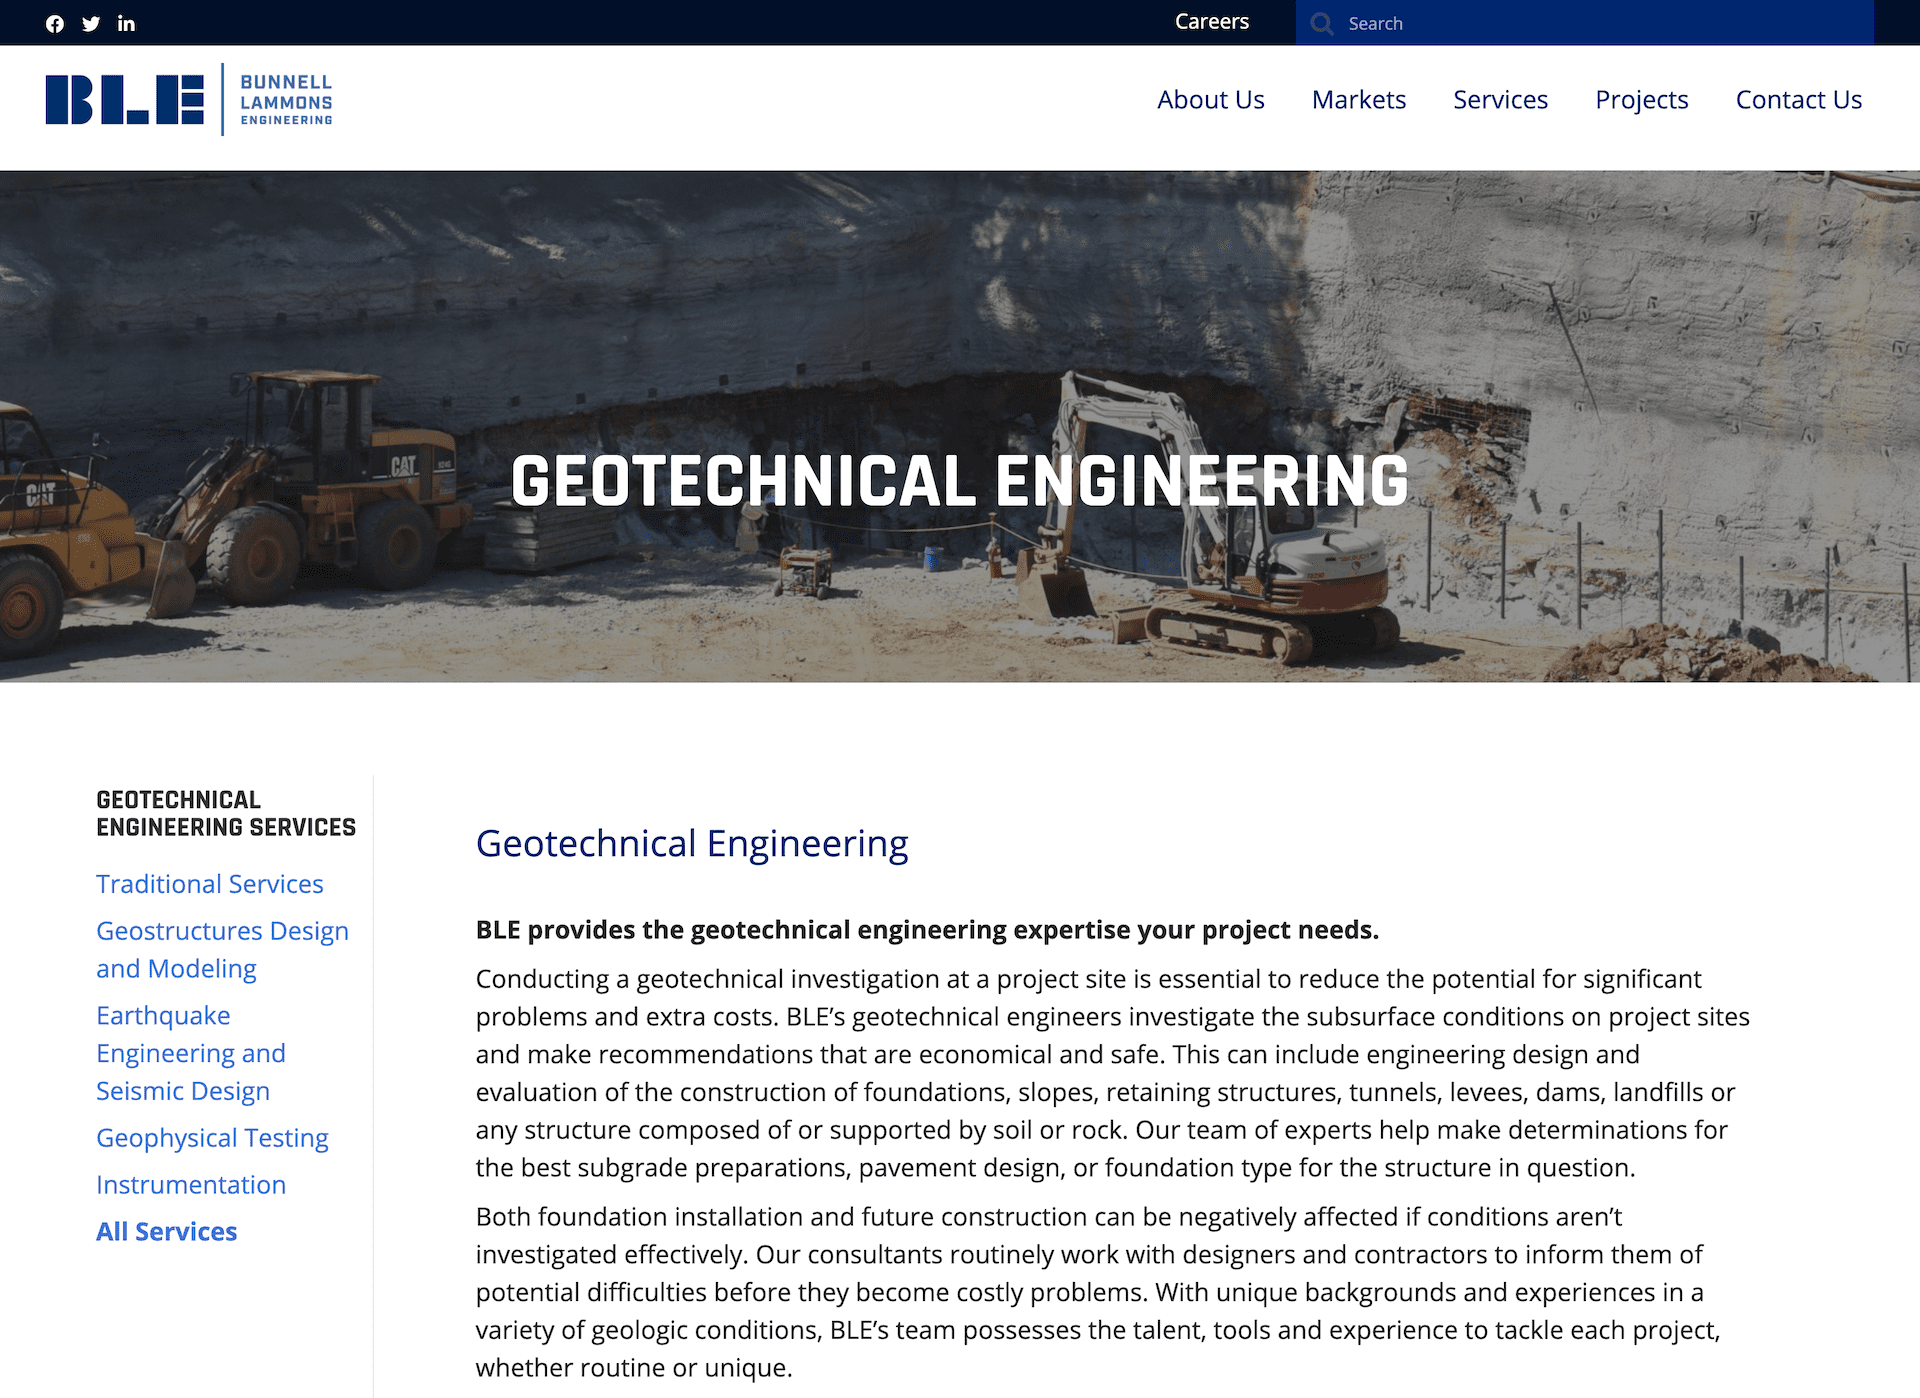 Geotechnical-Engineering-BLE